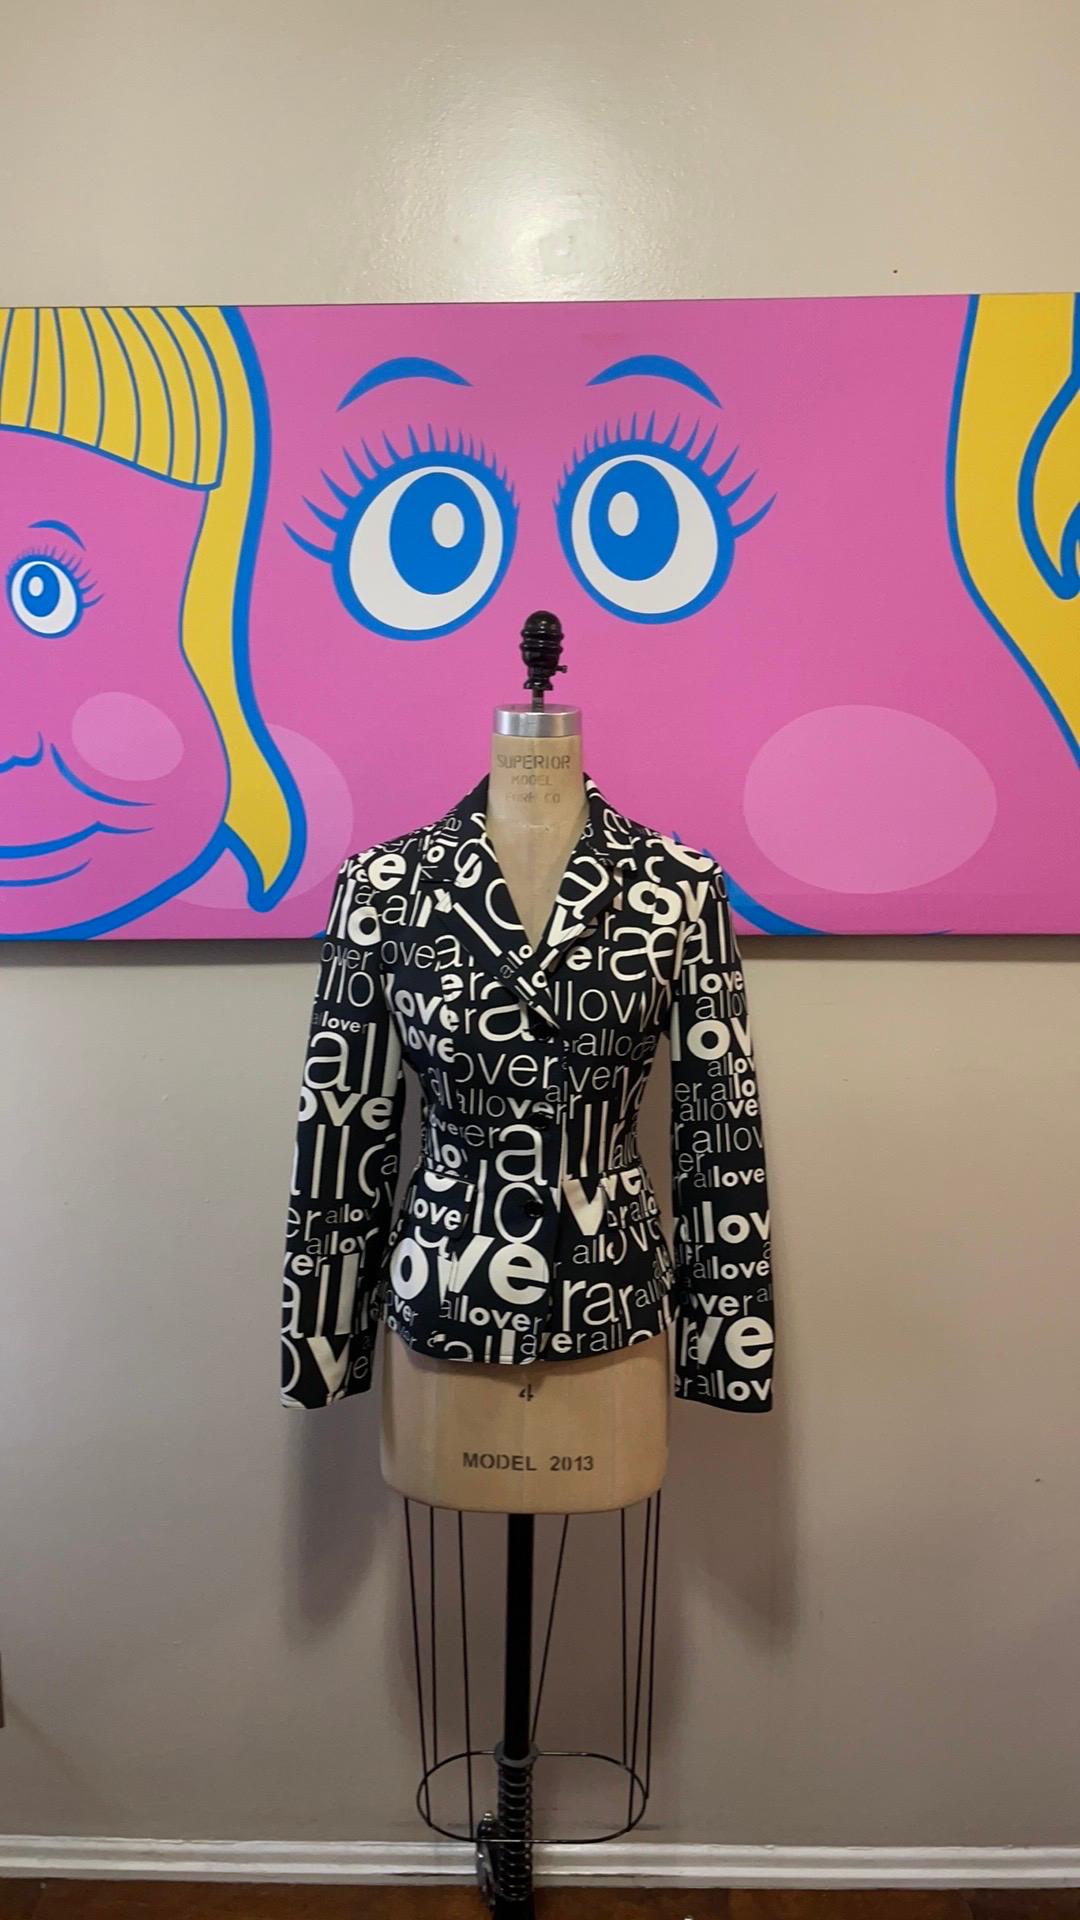 Moschino jeans black off white love blazer

Vintage perfection from Moschino Jeans with this Allover Print Jacket ! Pair with black or white skinny jeans for a great look.  Fran Drescher wore identical jacket in The Nanny with matching skirt.

Size